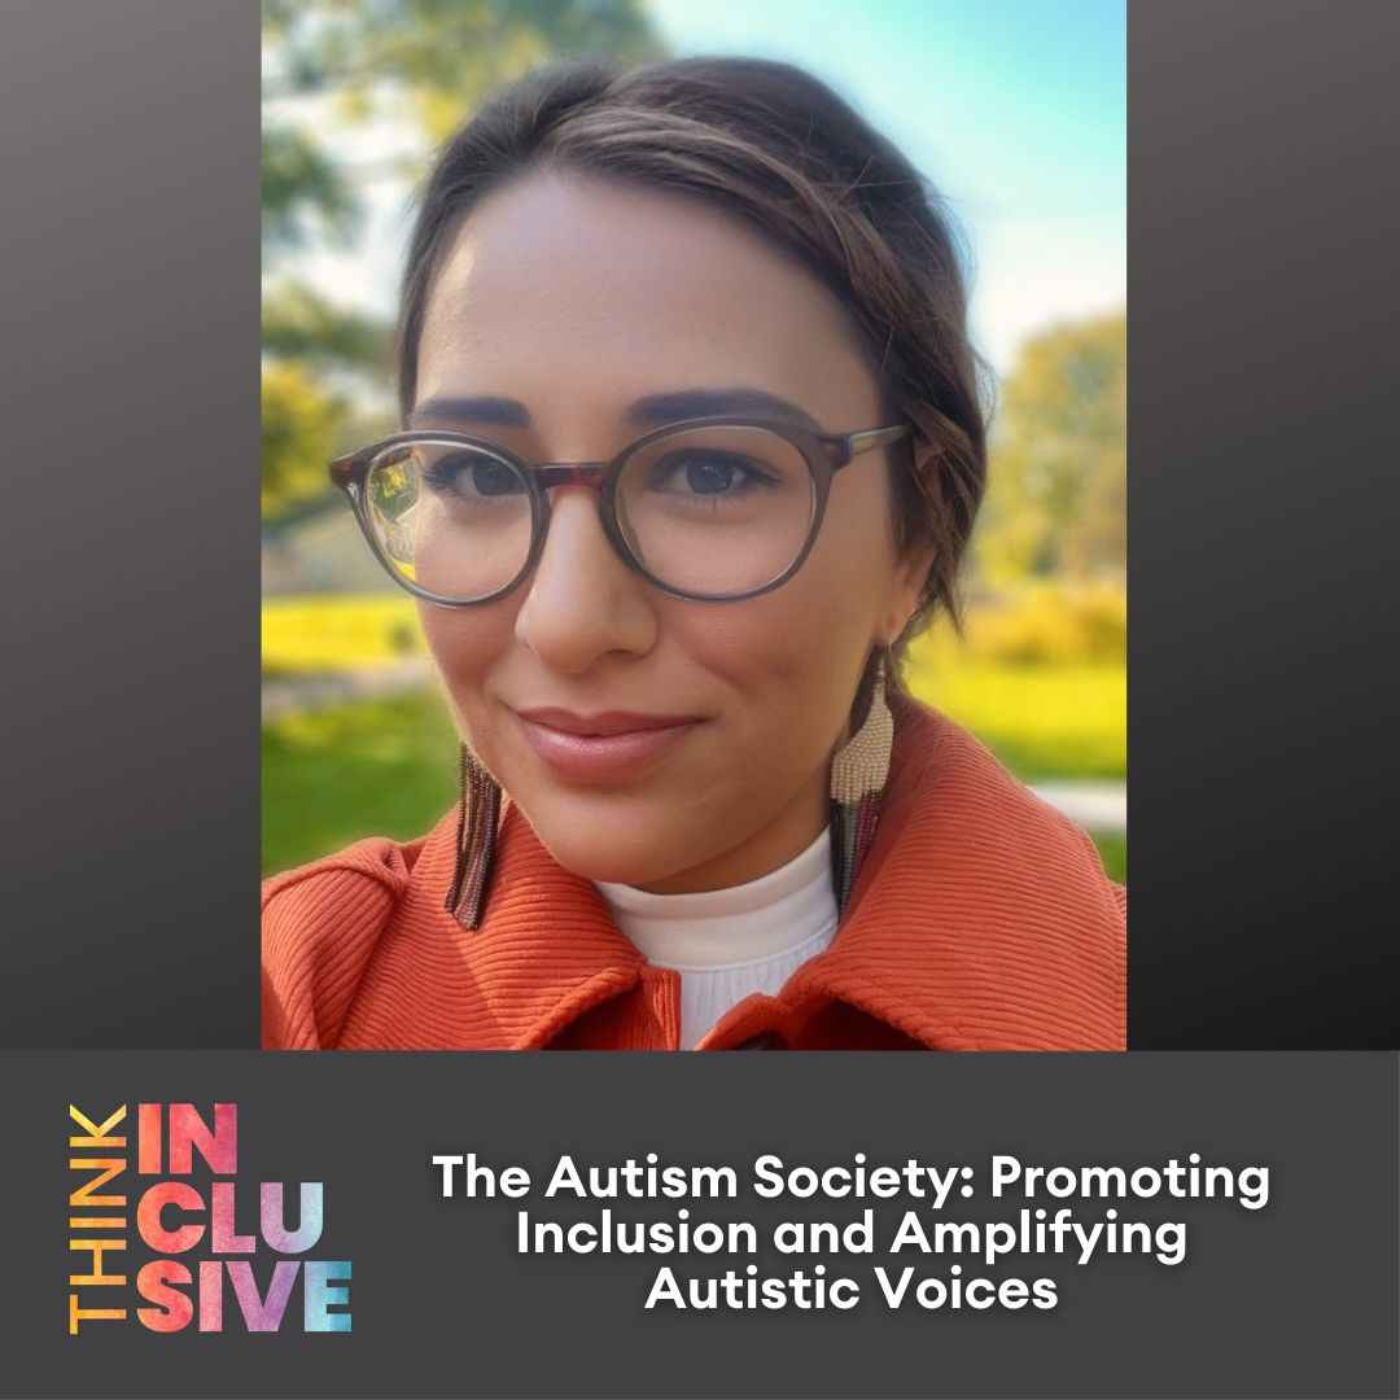 The Autism Society: Promoting Inclusion and Amplifying Autistic Voices